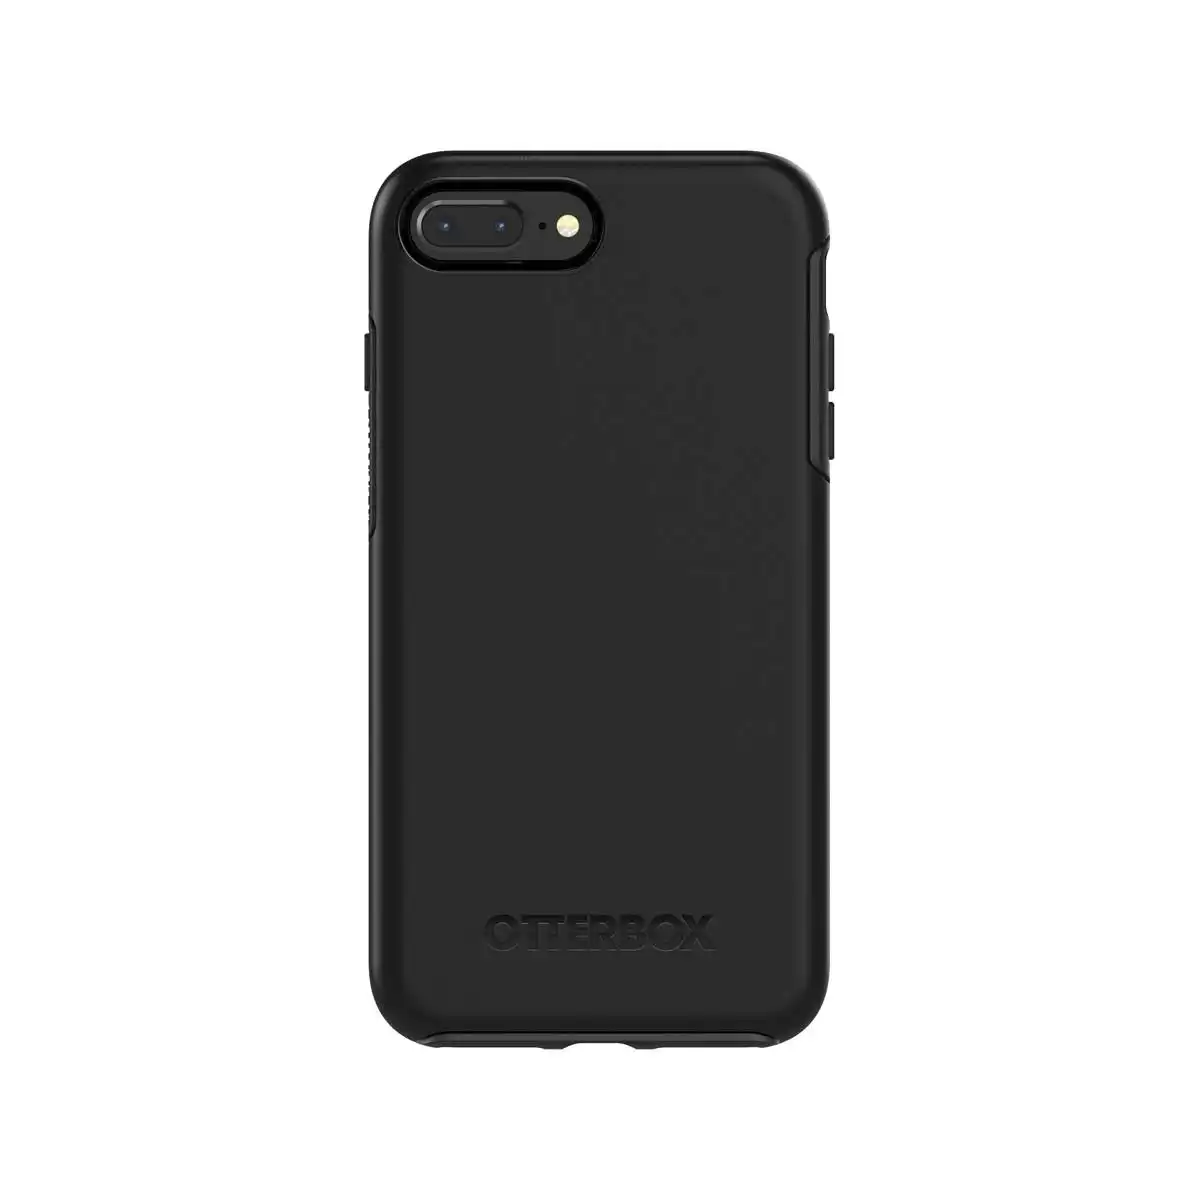 Otterbox Symmetry Phone Case for iPhone 7/8 Plus